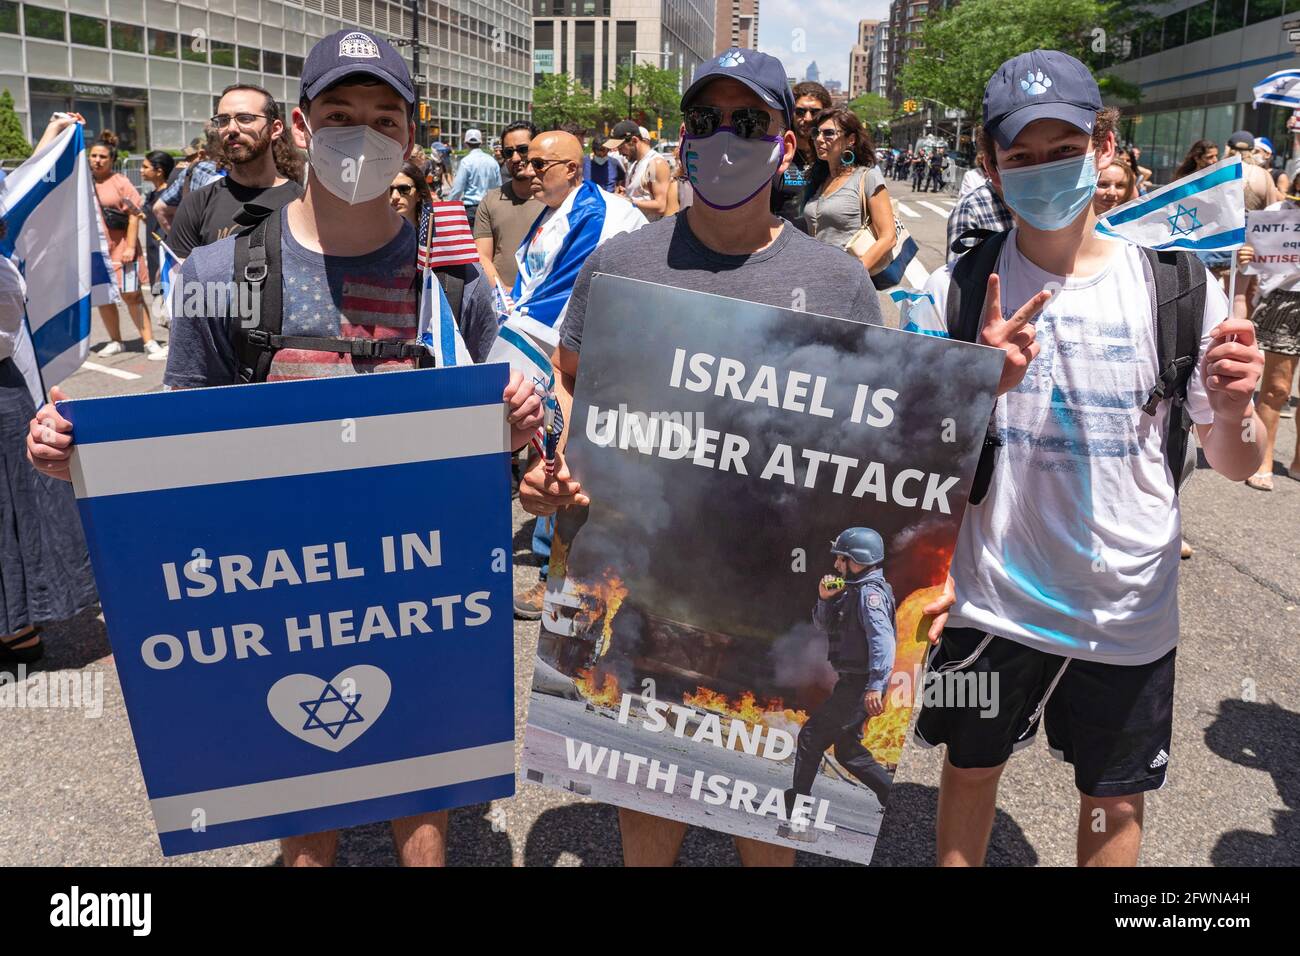 New York, United States. 23rd May, 2021. Pro-Israel supporters hold placards saying Israel In Our Hearts and Israel Is Under Attack I Stand With Israel during a rally.Jewish and pro-Israel demonstrators gathered at the site of the World Trade Center, waving Israeli and American flags in solidarity with Israel following the most recent war with Hamas in Gaza, and in protest against rising levels of antisemitism and severe anti-Jewish attacks in the wake of the conflict. Credit: SOPA Images Limited/Alamy Live News Stock Photo